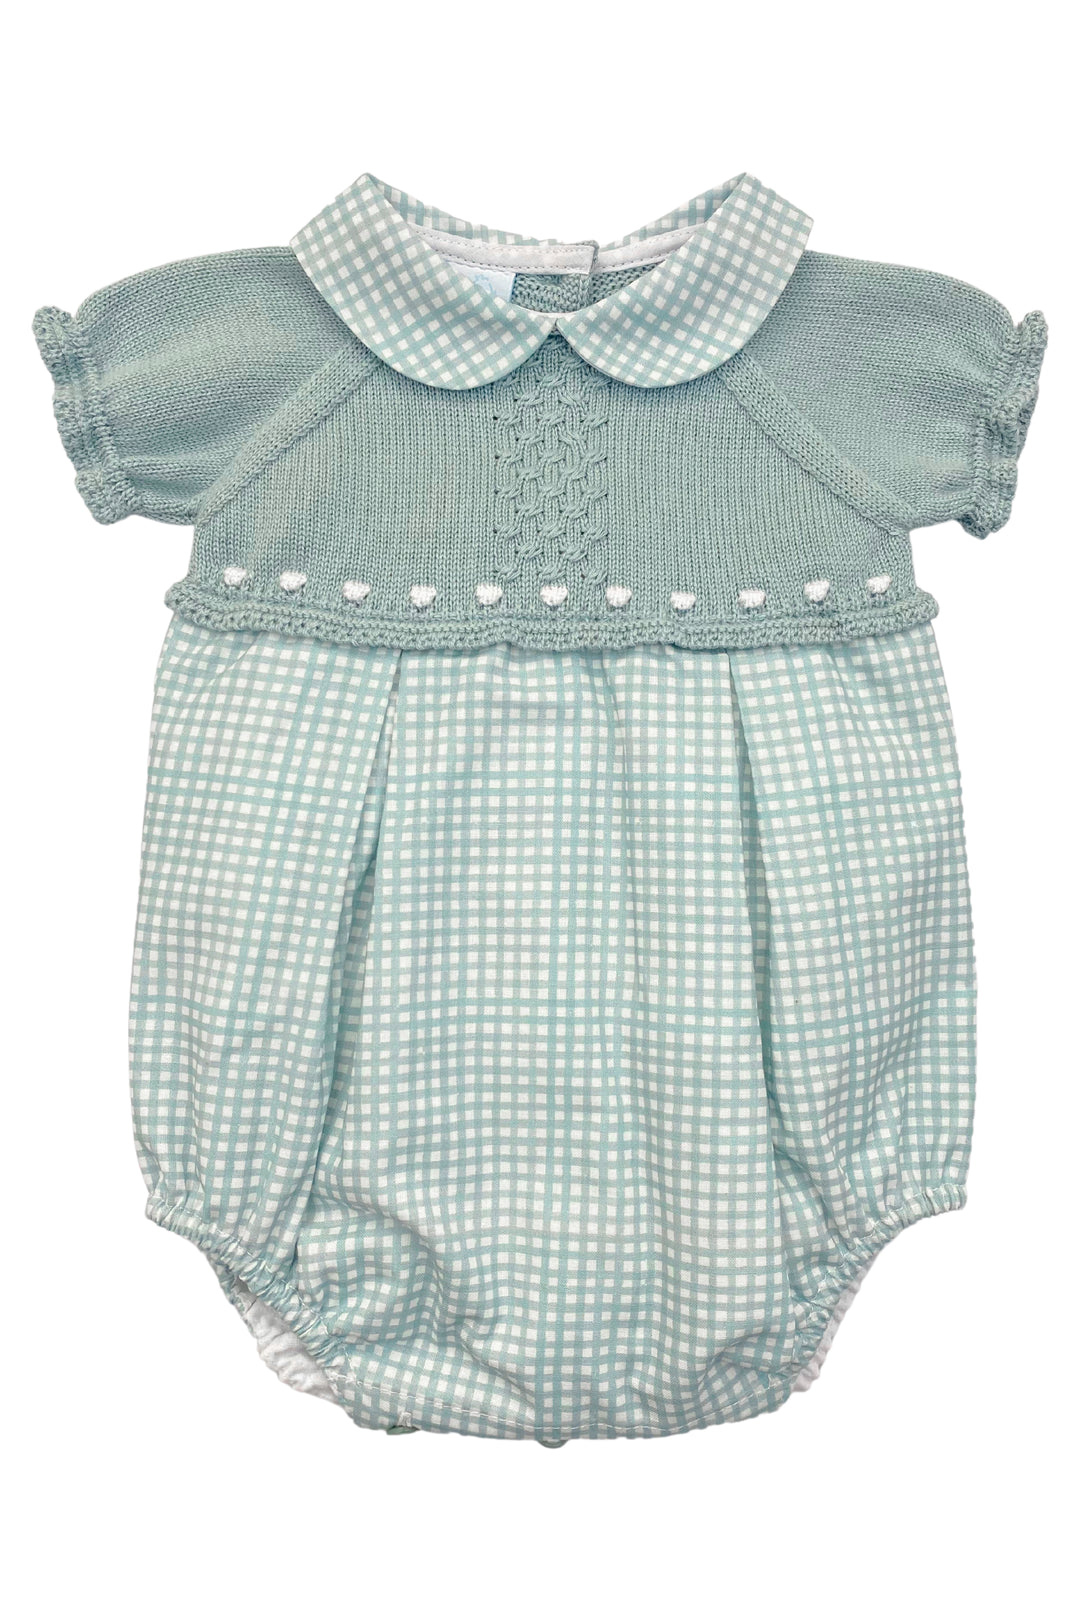 Granlei "Beckett" Teal Half Knit Checked Romper | iphoneandroidapplications